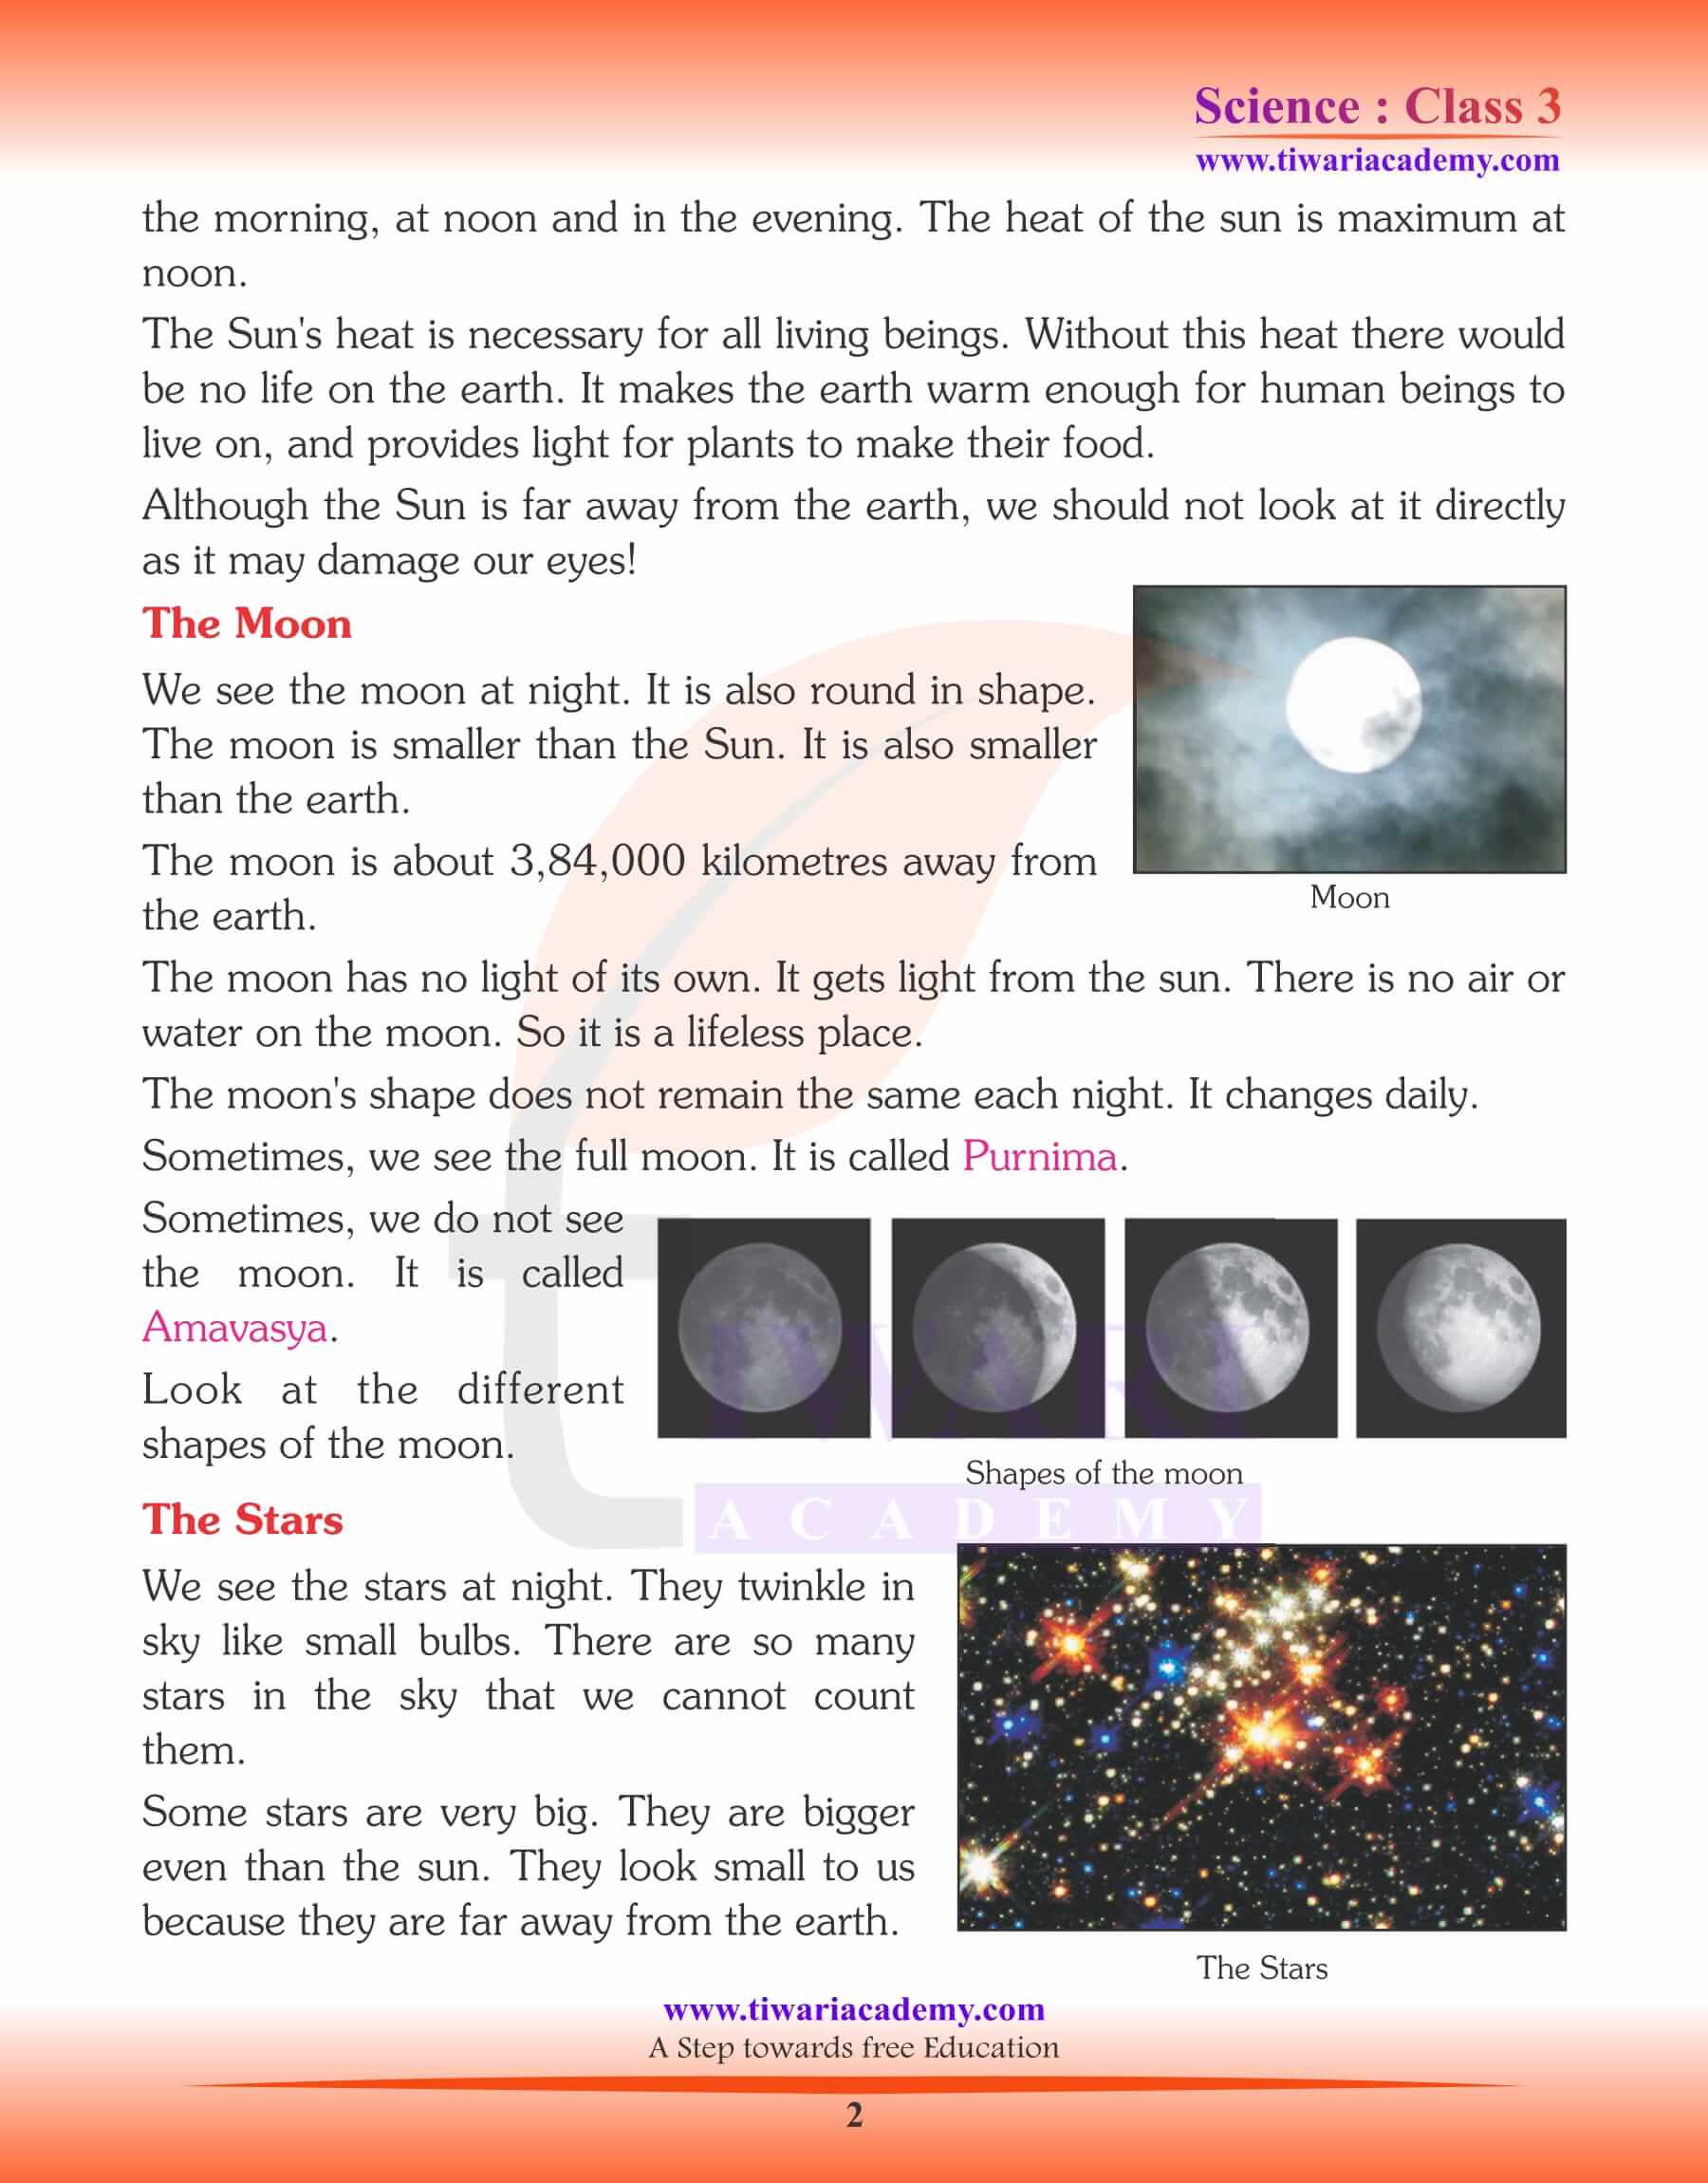 Class 3 Science Chapter 15 Heavenly Bodies in Outer Space